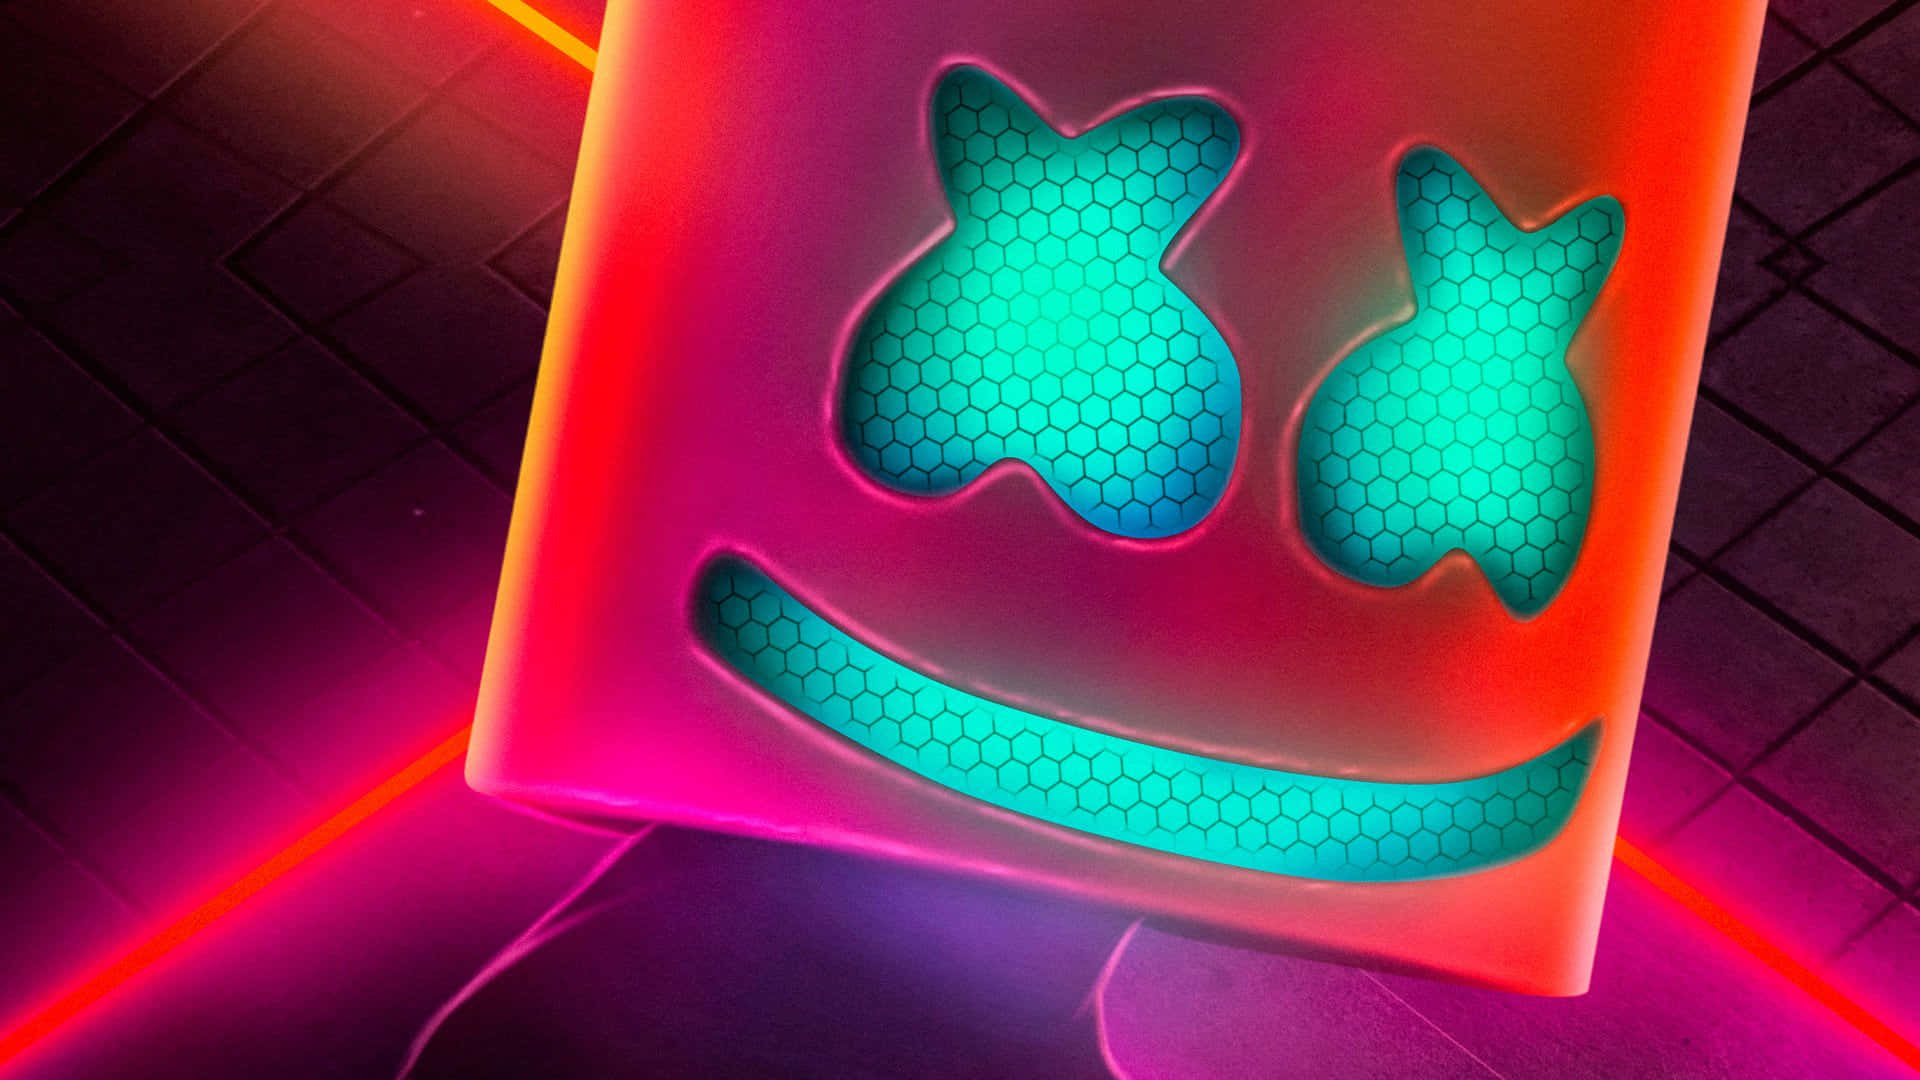 Listen to Marshmello and Get Lost in Music